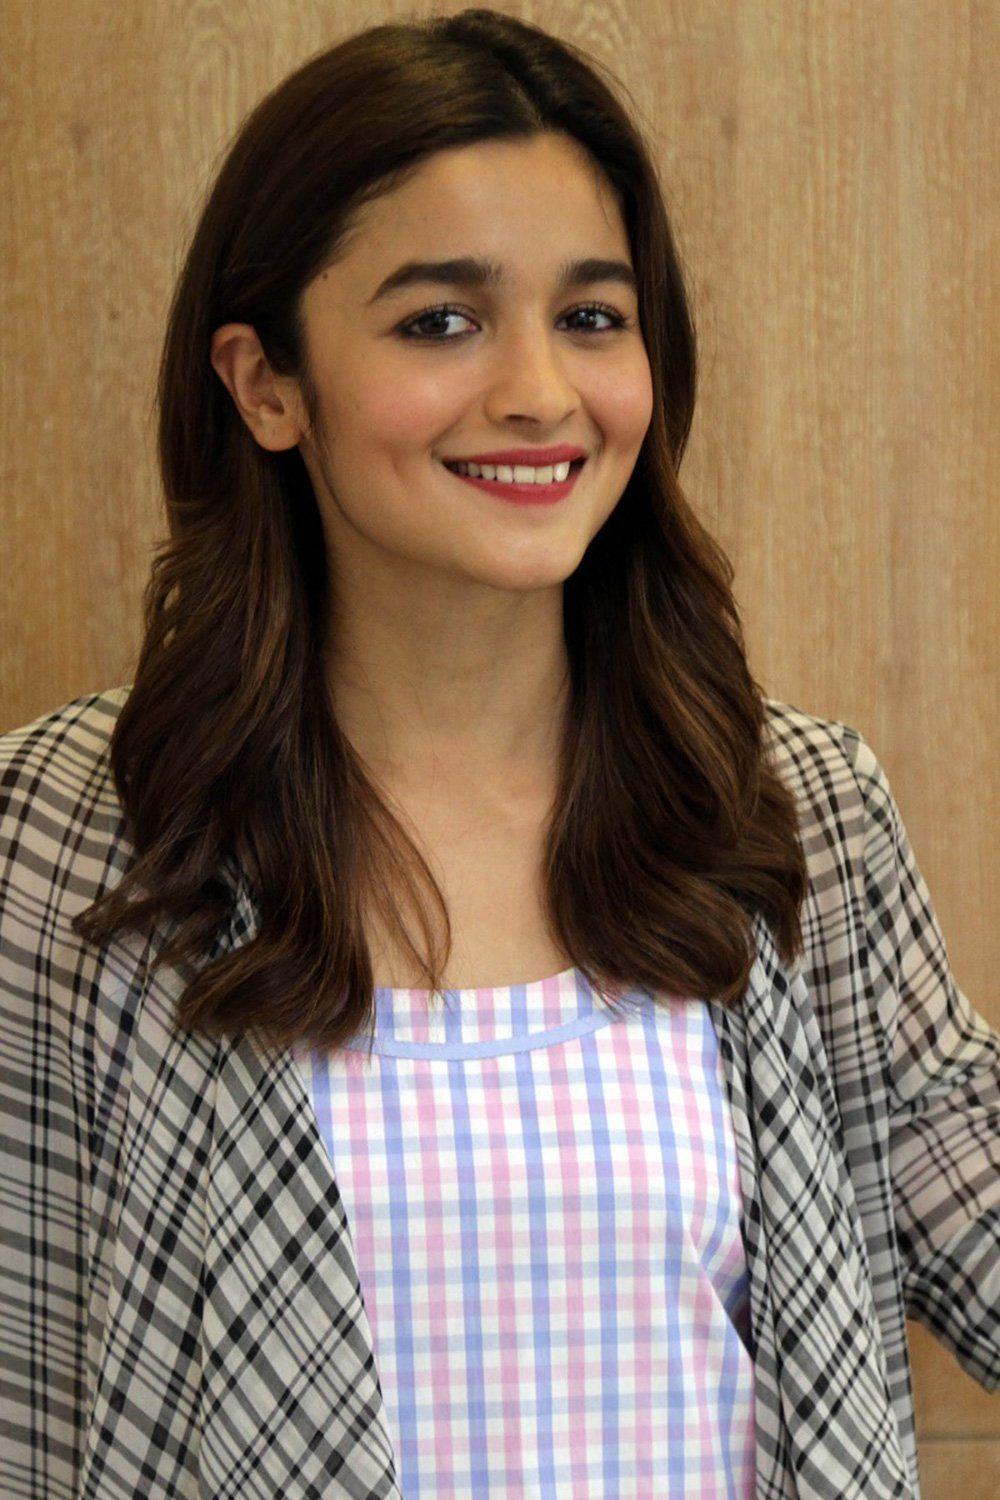 Alia Bhatt very cute and smiley face expression mobile